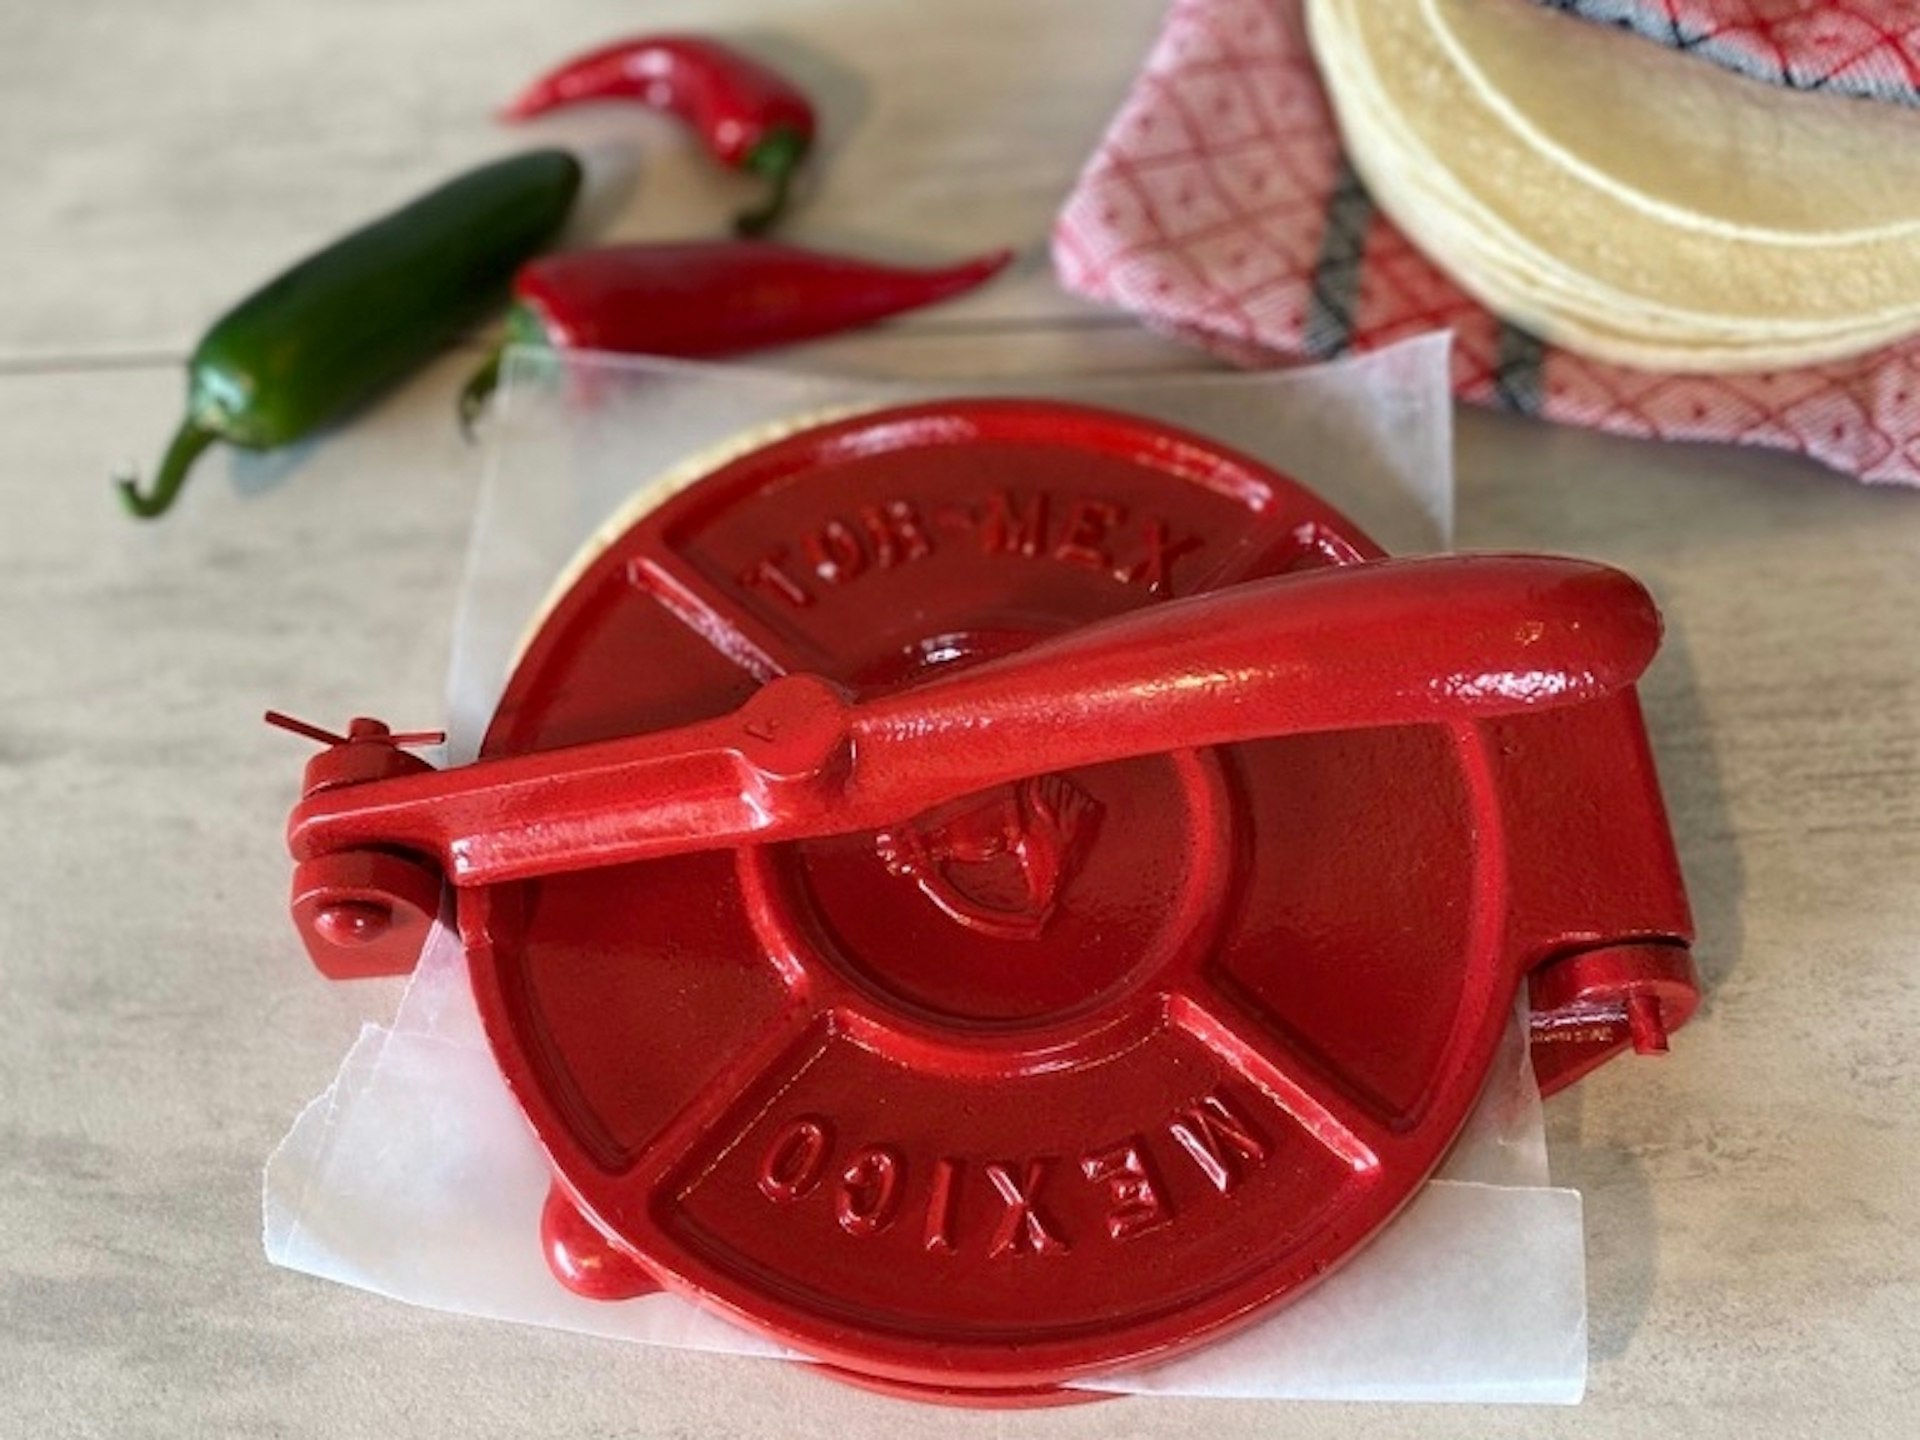 Verve Culture's red tortilla press with chili peppers and a folded napkin holding tortillas